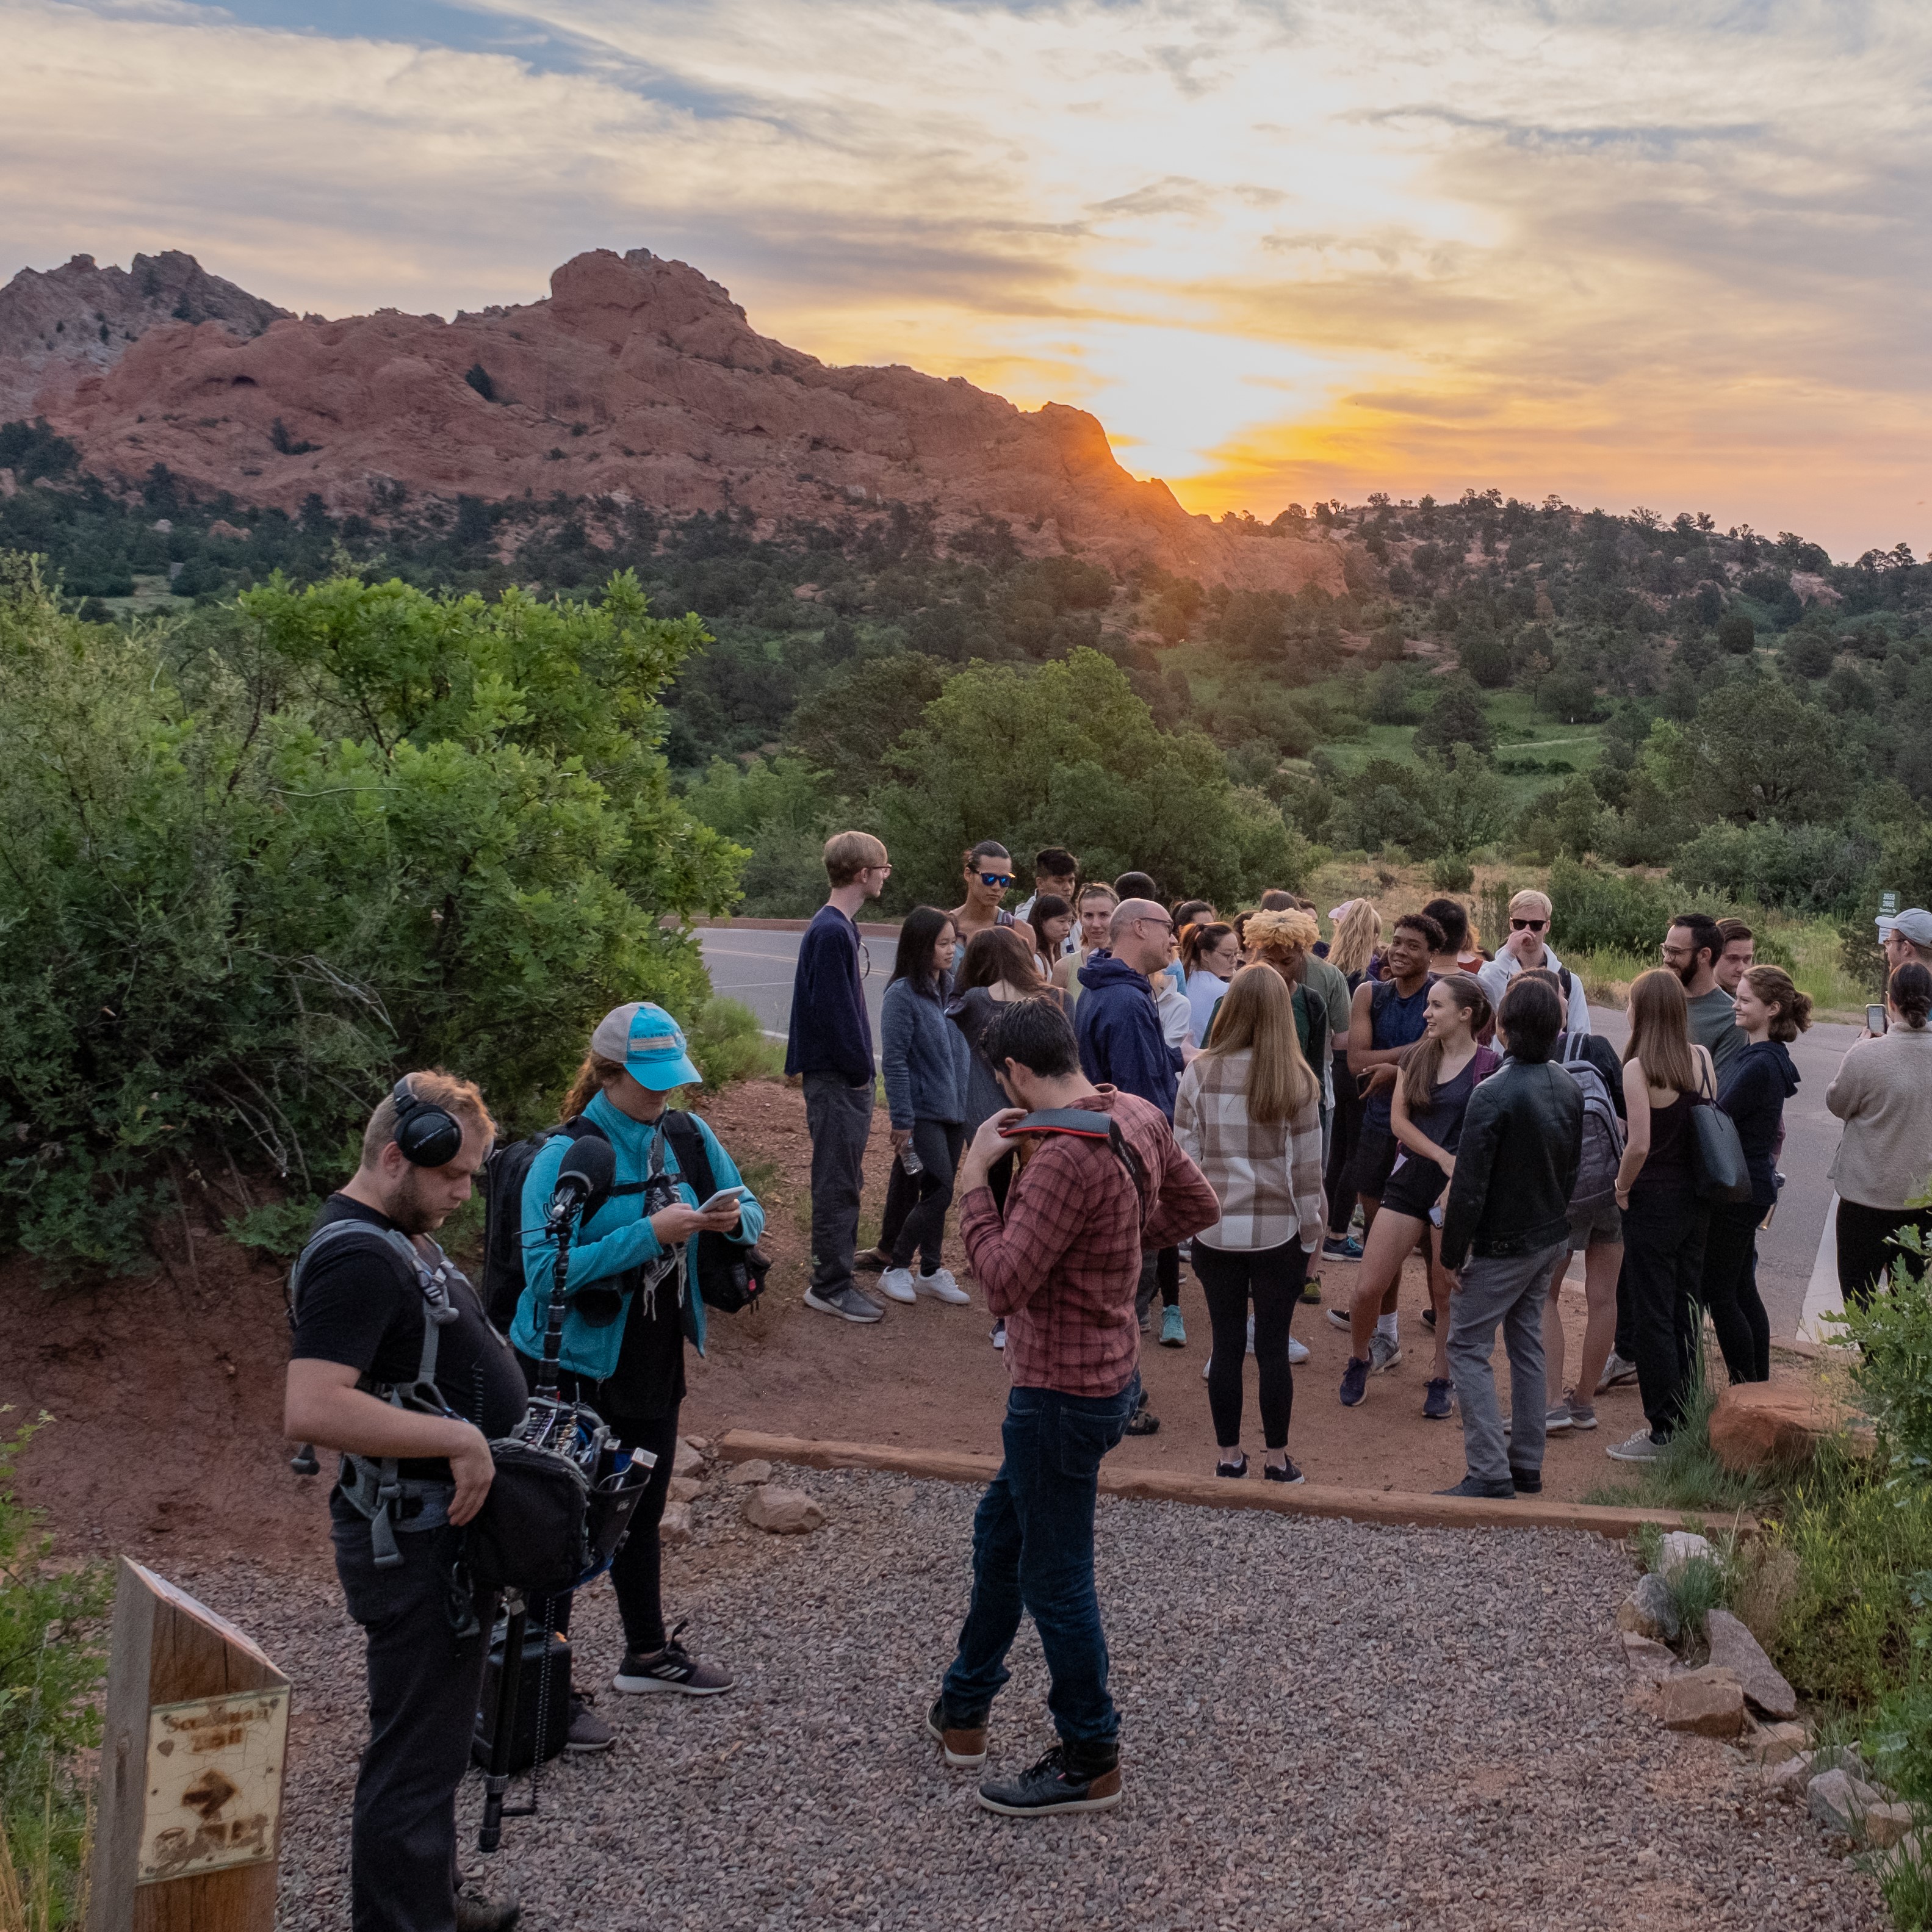 Sunrise before filming in the Garden of the Gods <span class="cc-gallery-credit">[Josh Birndorf]</span>